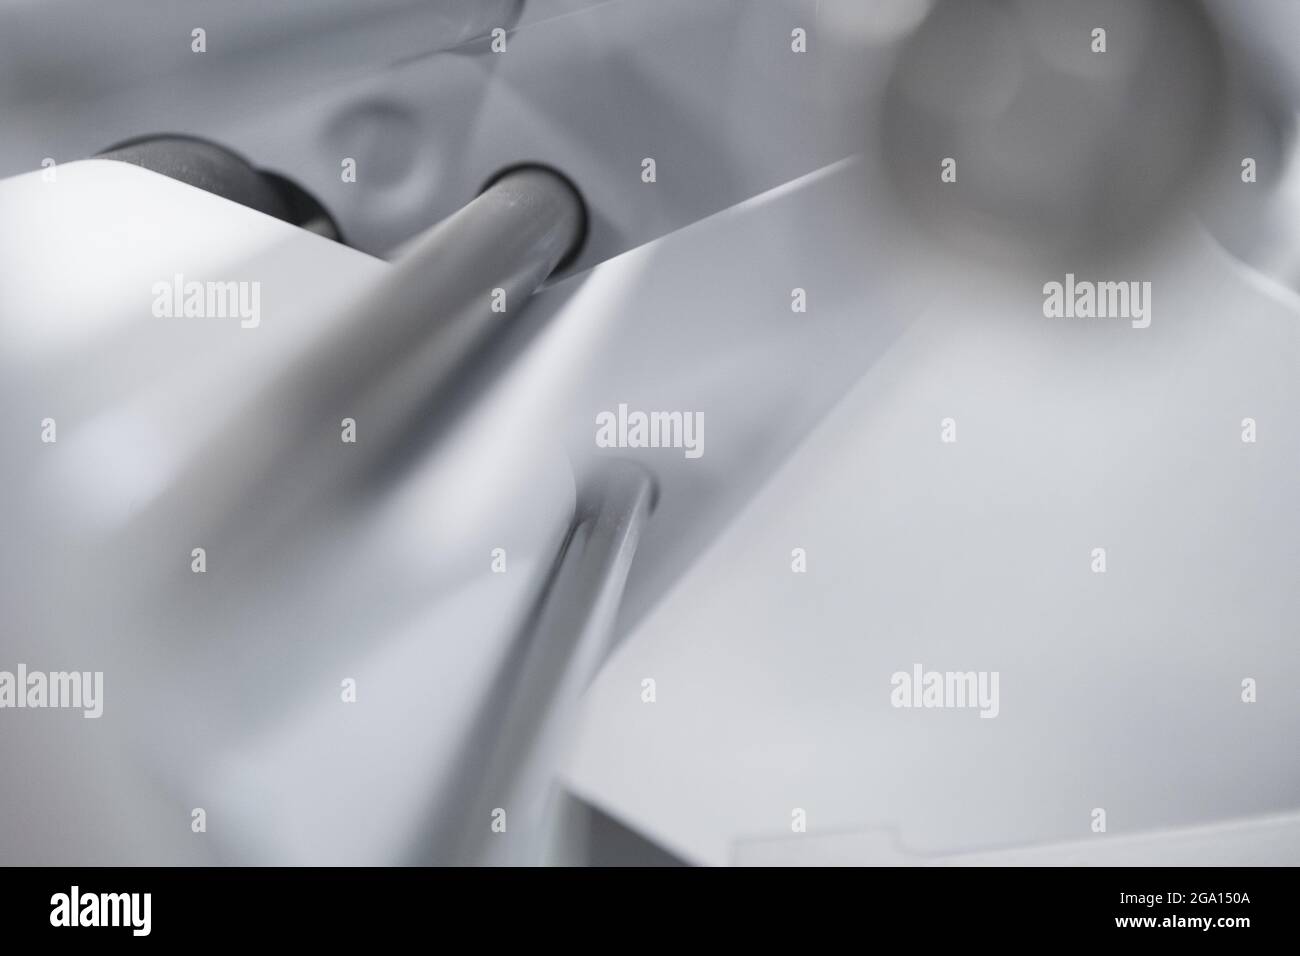 Close up of stainless steel printer machine parts. Softness, simplicity. Stock Photo